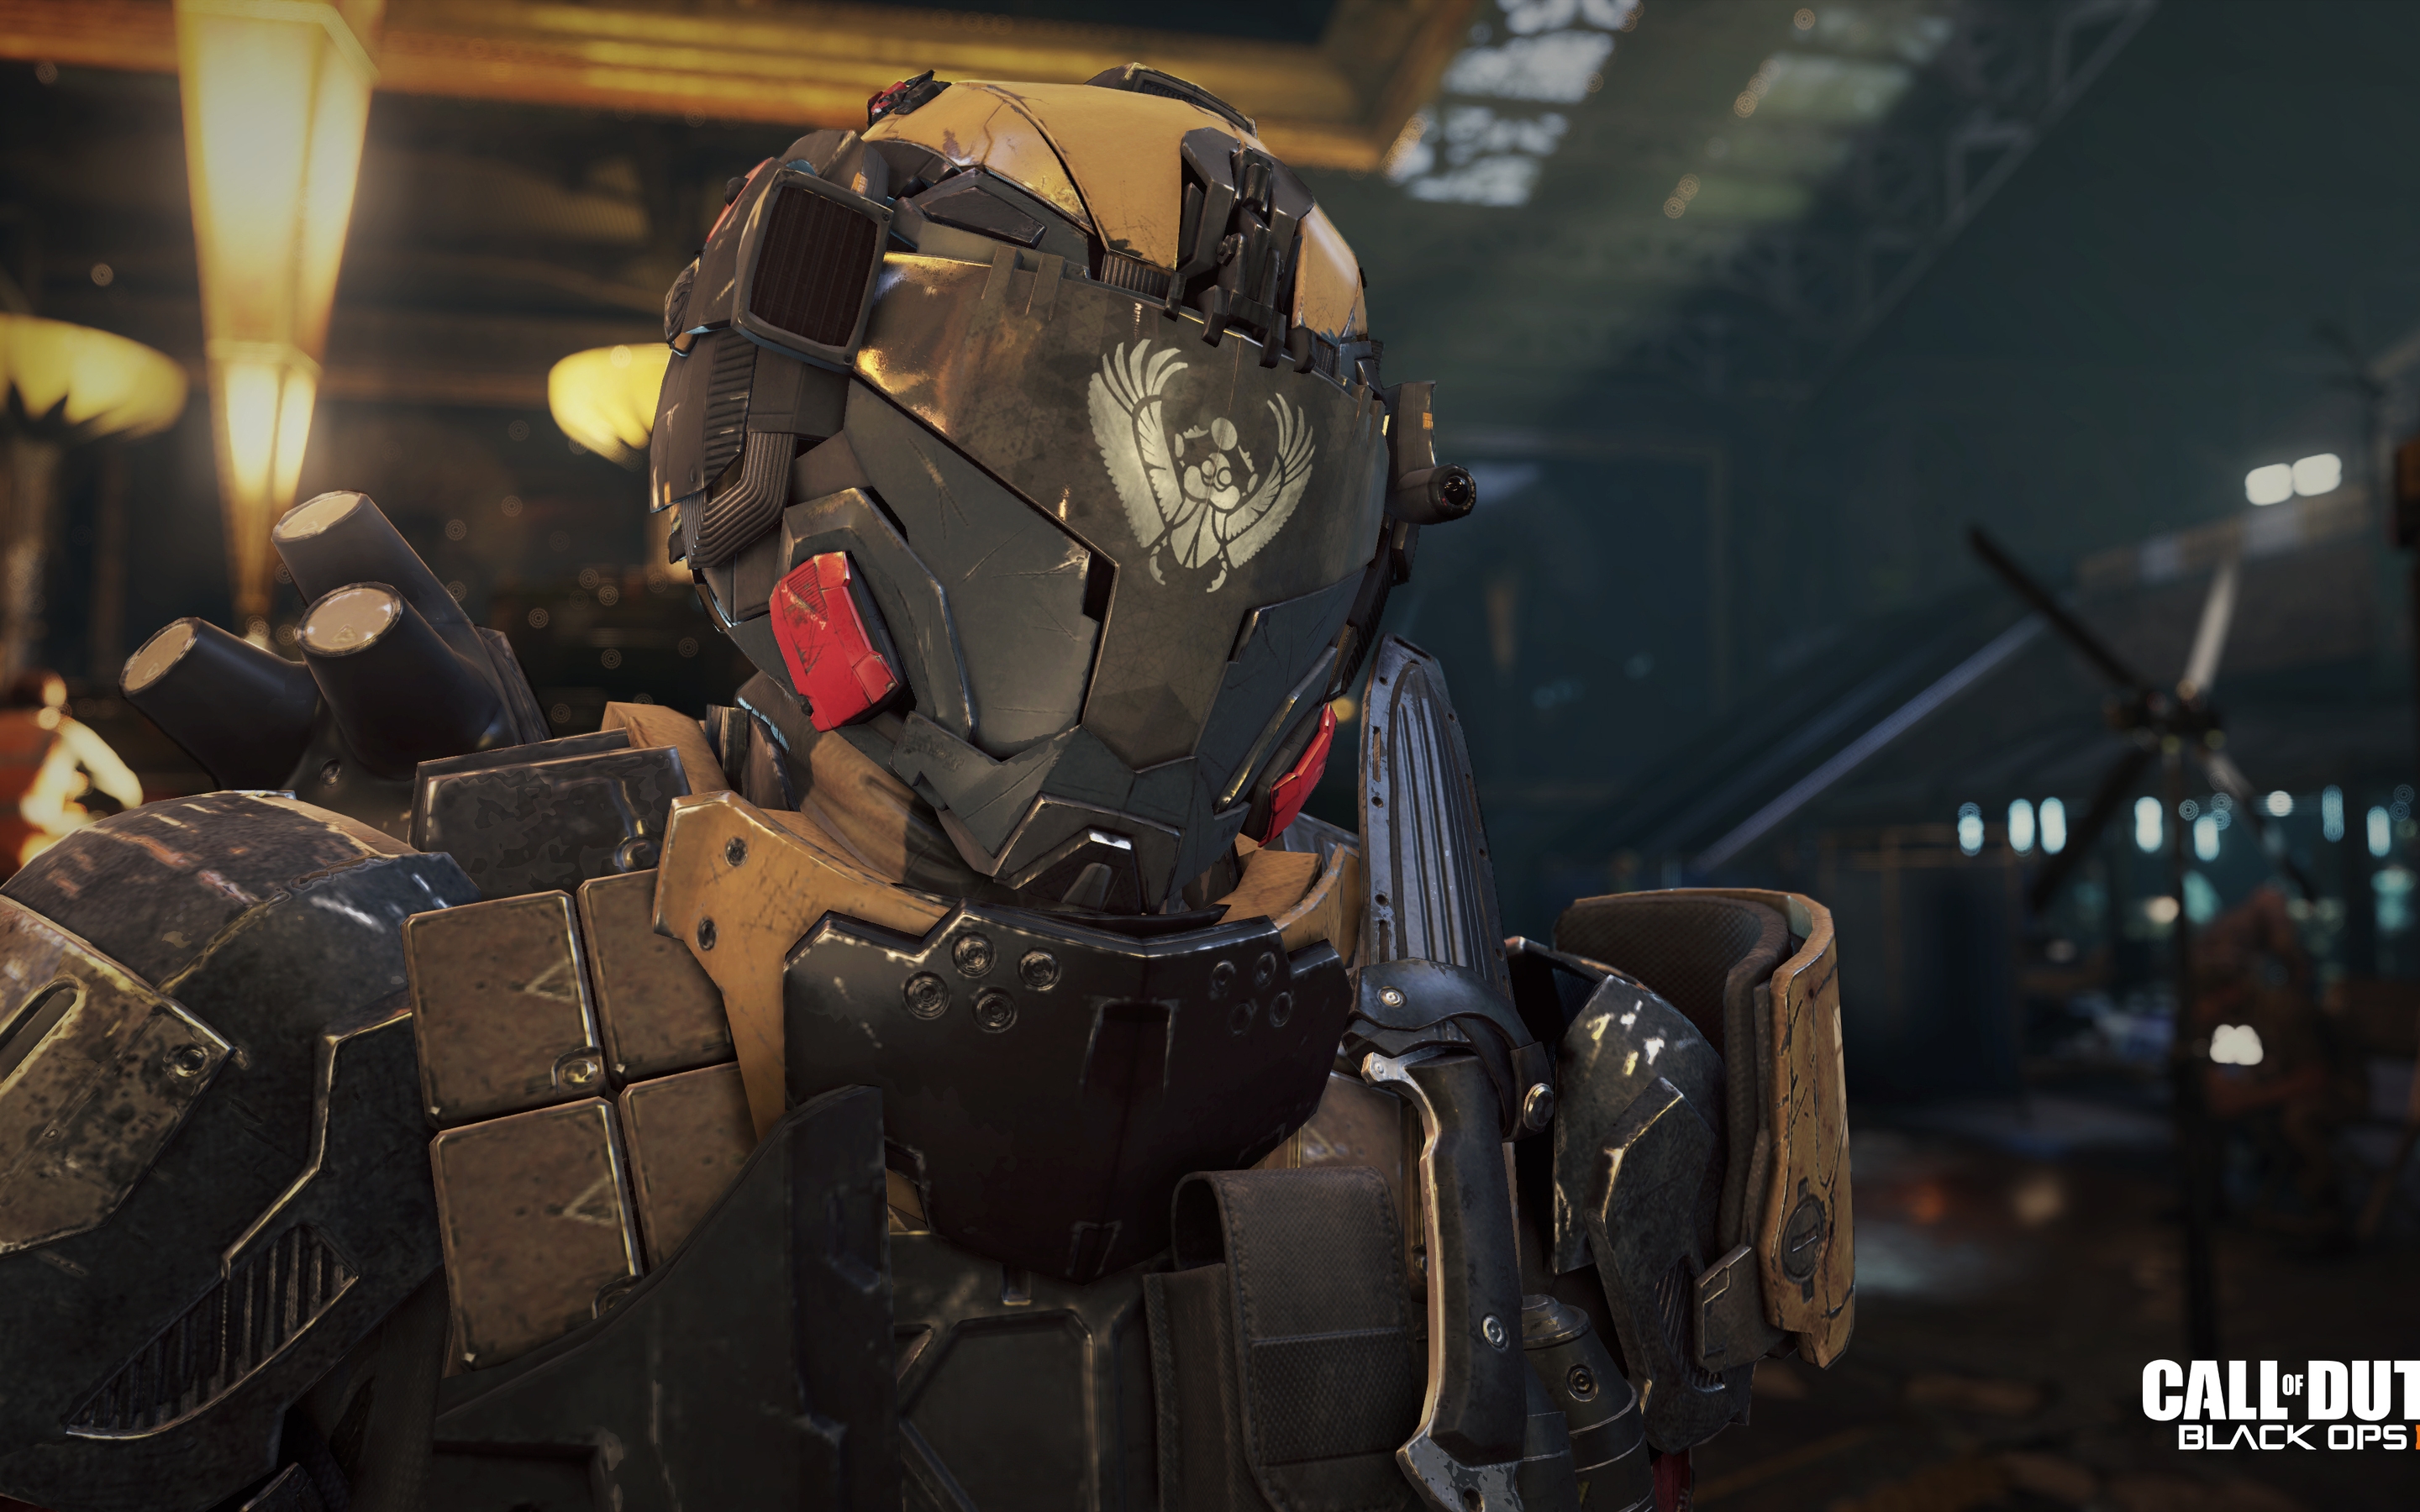 Call of Duty Black Ops 3 Ramses Station Armored Guard for 2880 x 1800 Retina Display resolution